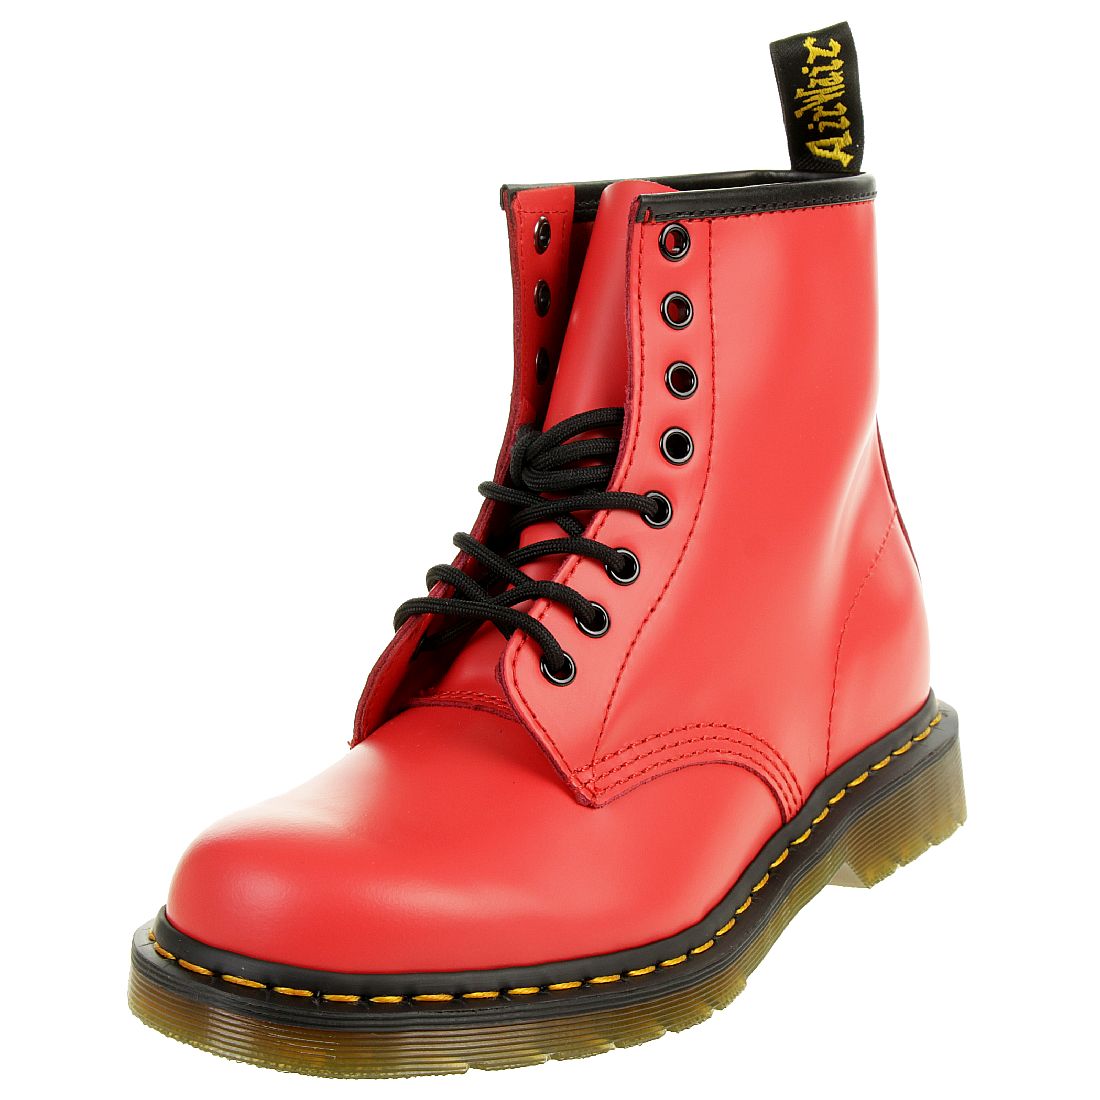 Dr. Martens 1460 Smooth Red Damen Stiefel Boots rot 24614636